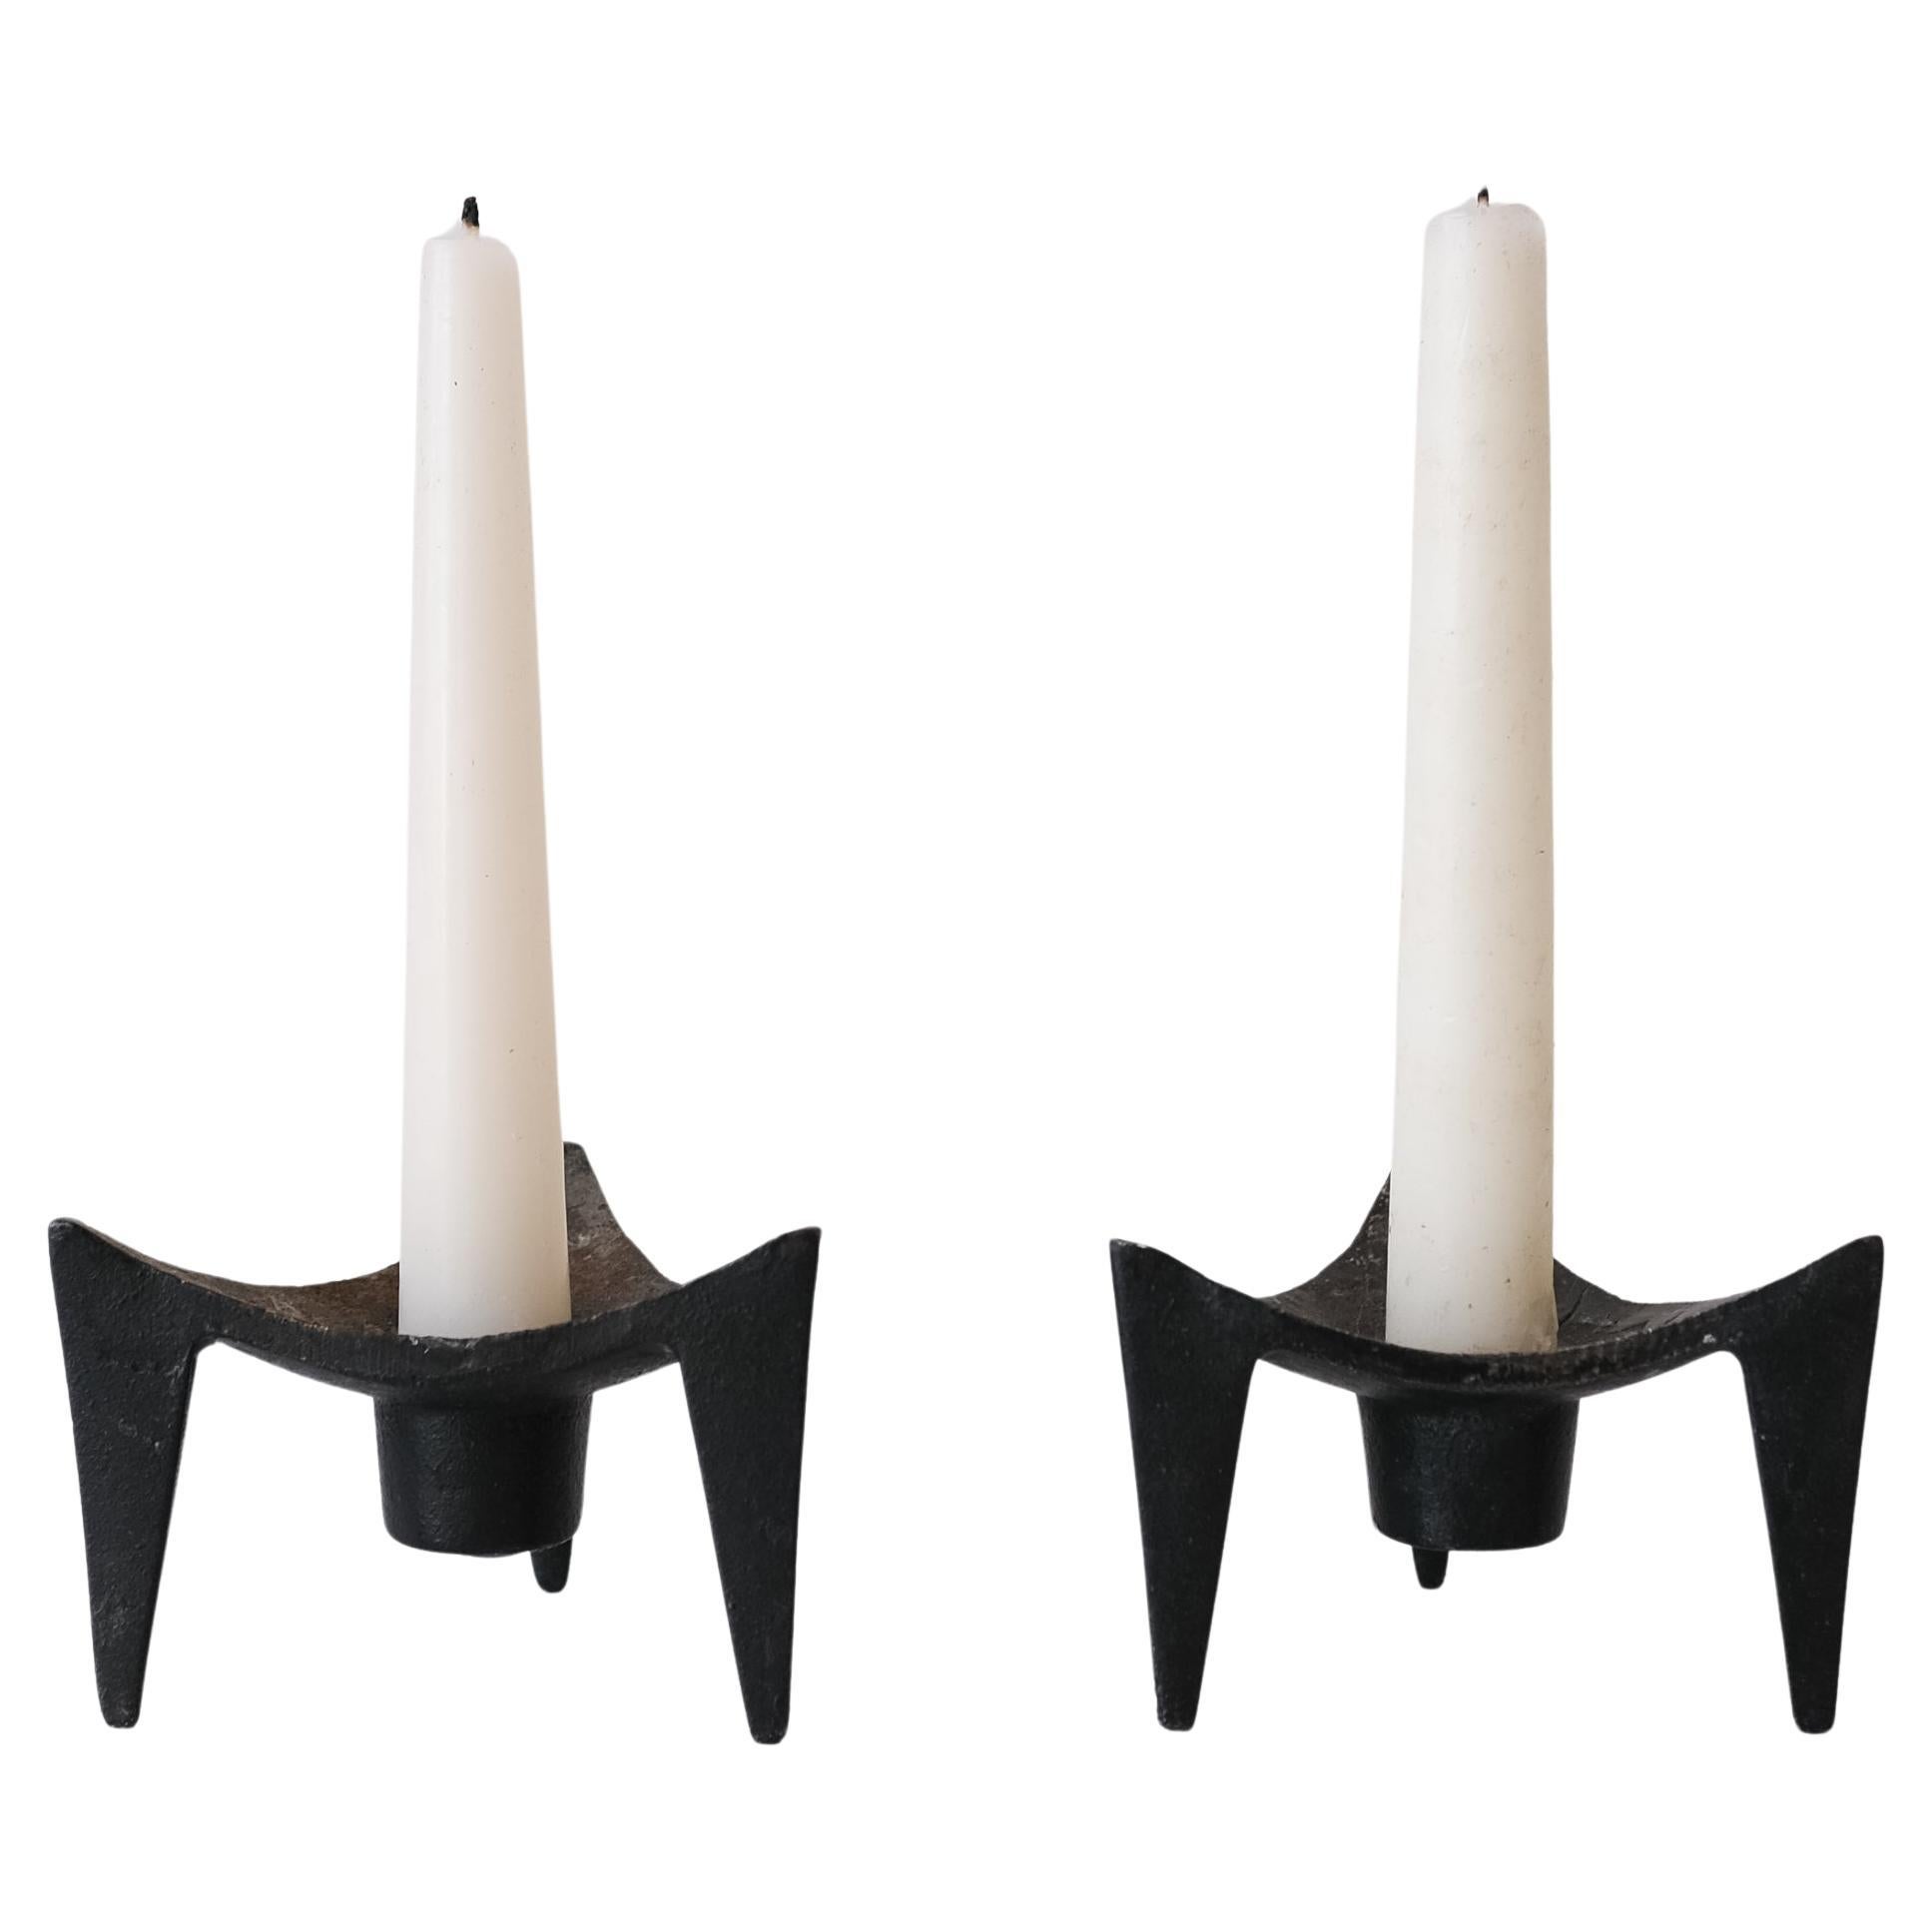 Mid-Century Modernist Japanese Iron Candle Holders For Sale